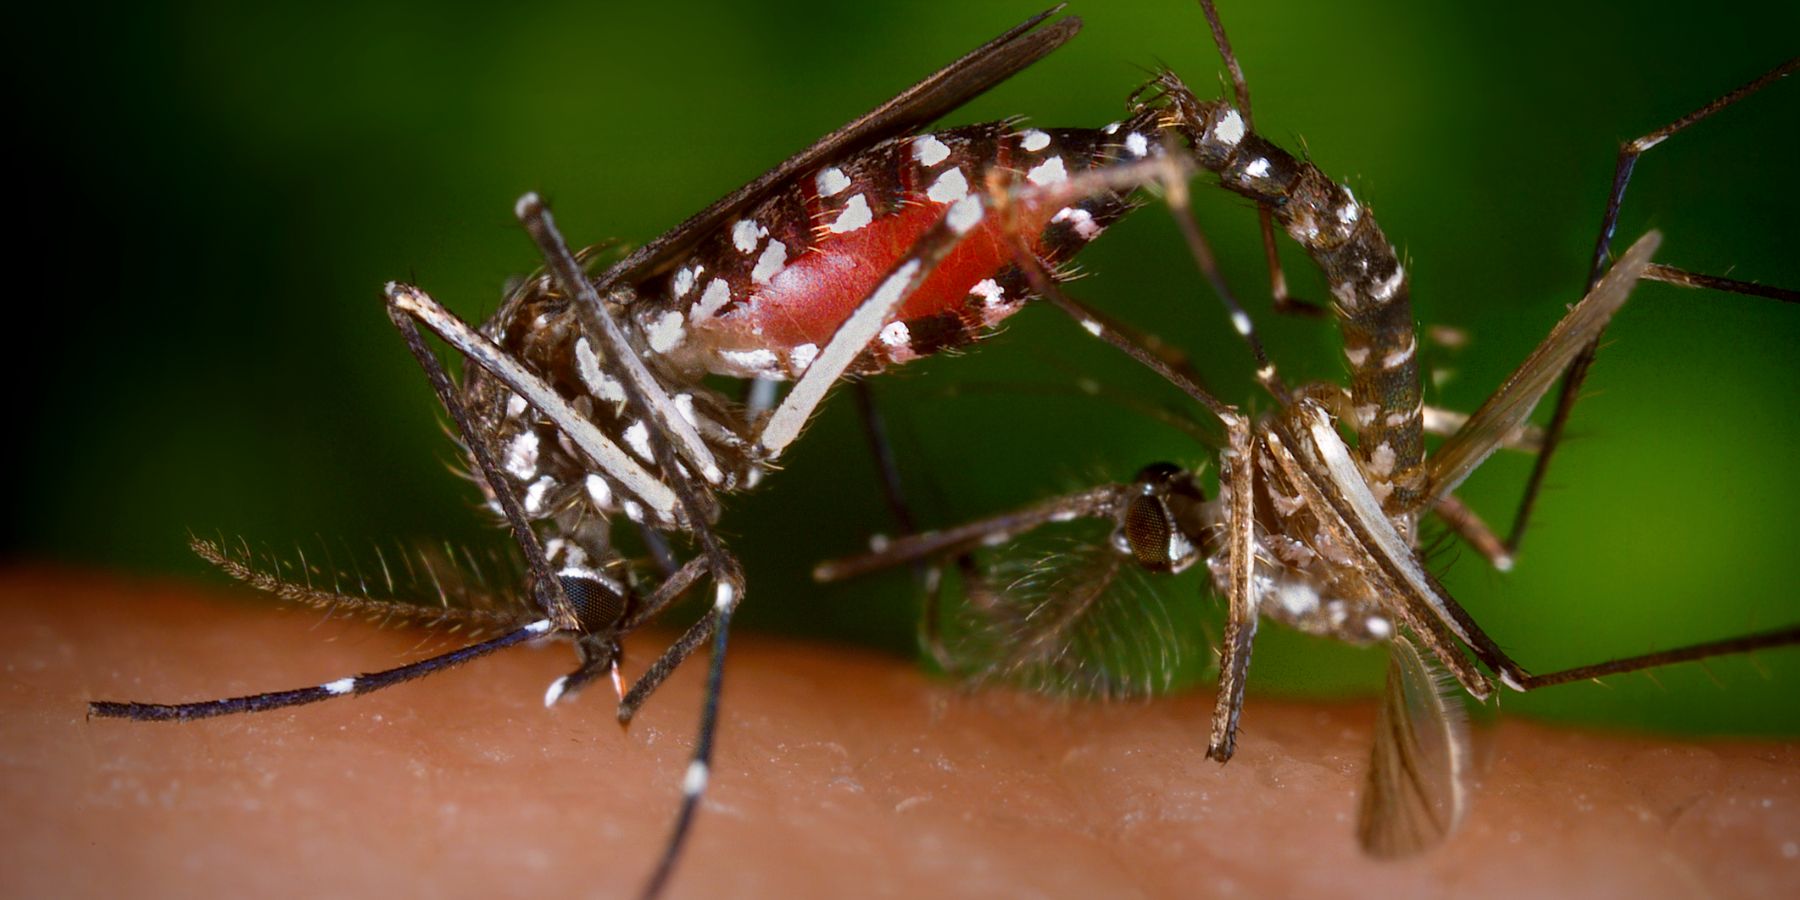 Preparing Your Yard for Mosquito Control in the Winter